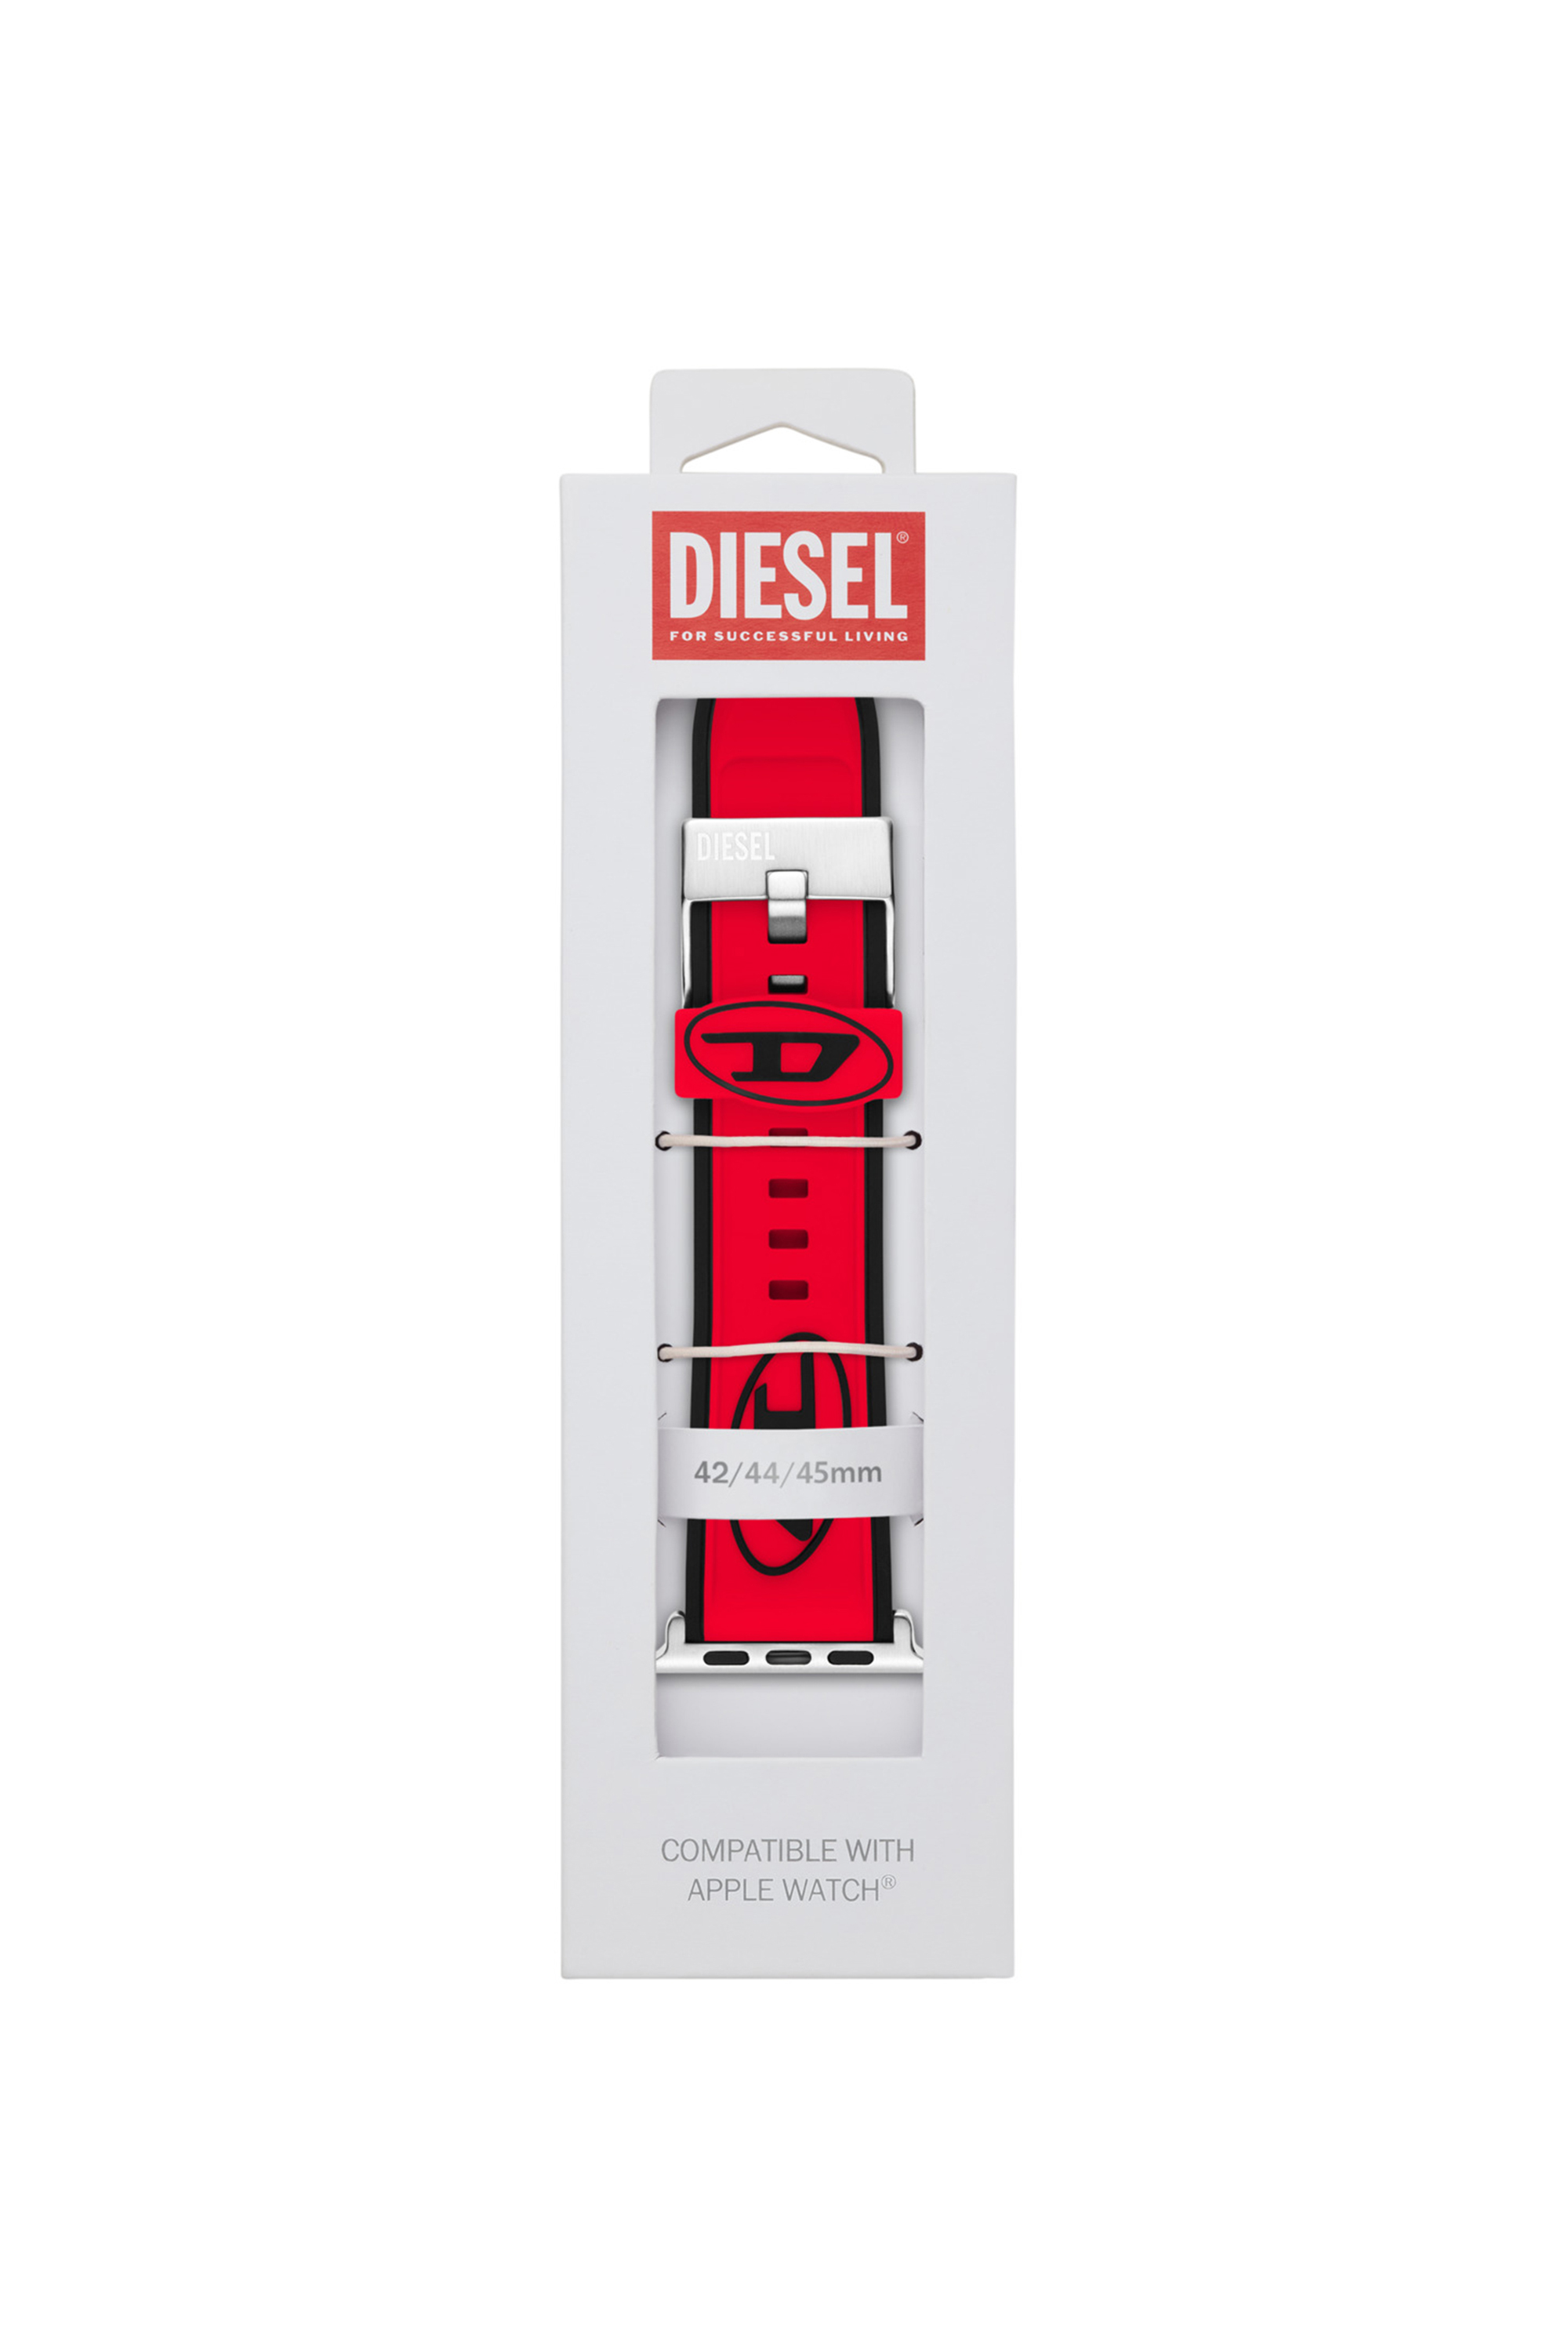 Diesel - DSS010, Unisex Silicone band for Apple watch®, 42mm, 44mm, 45mm in Red - Image 2